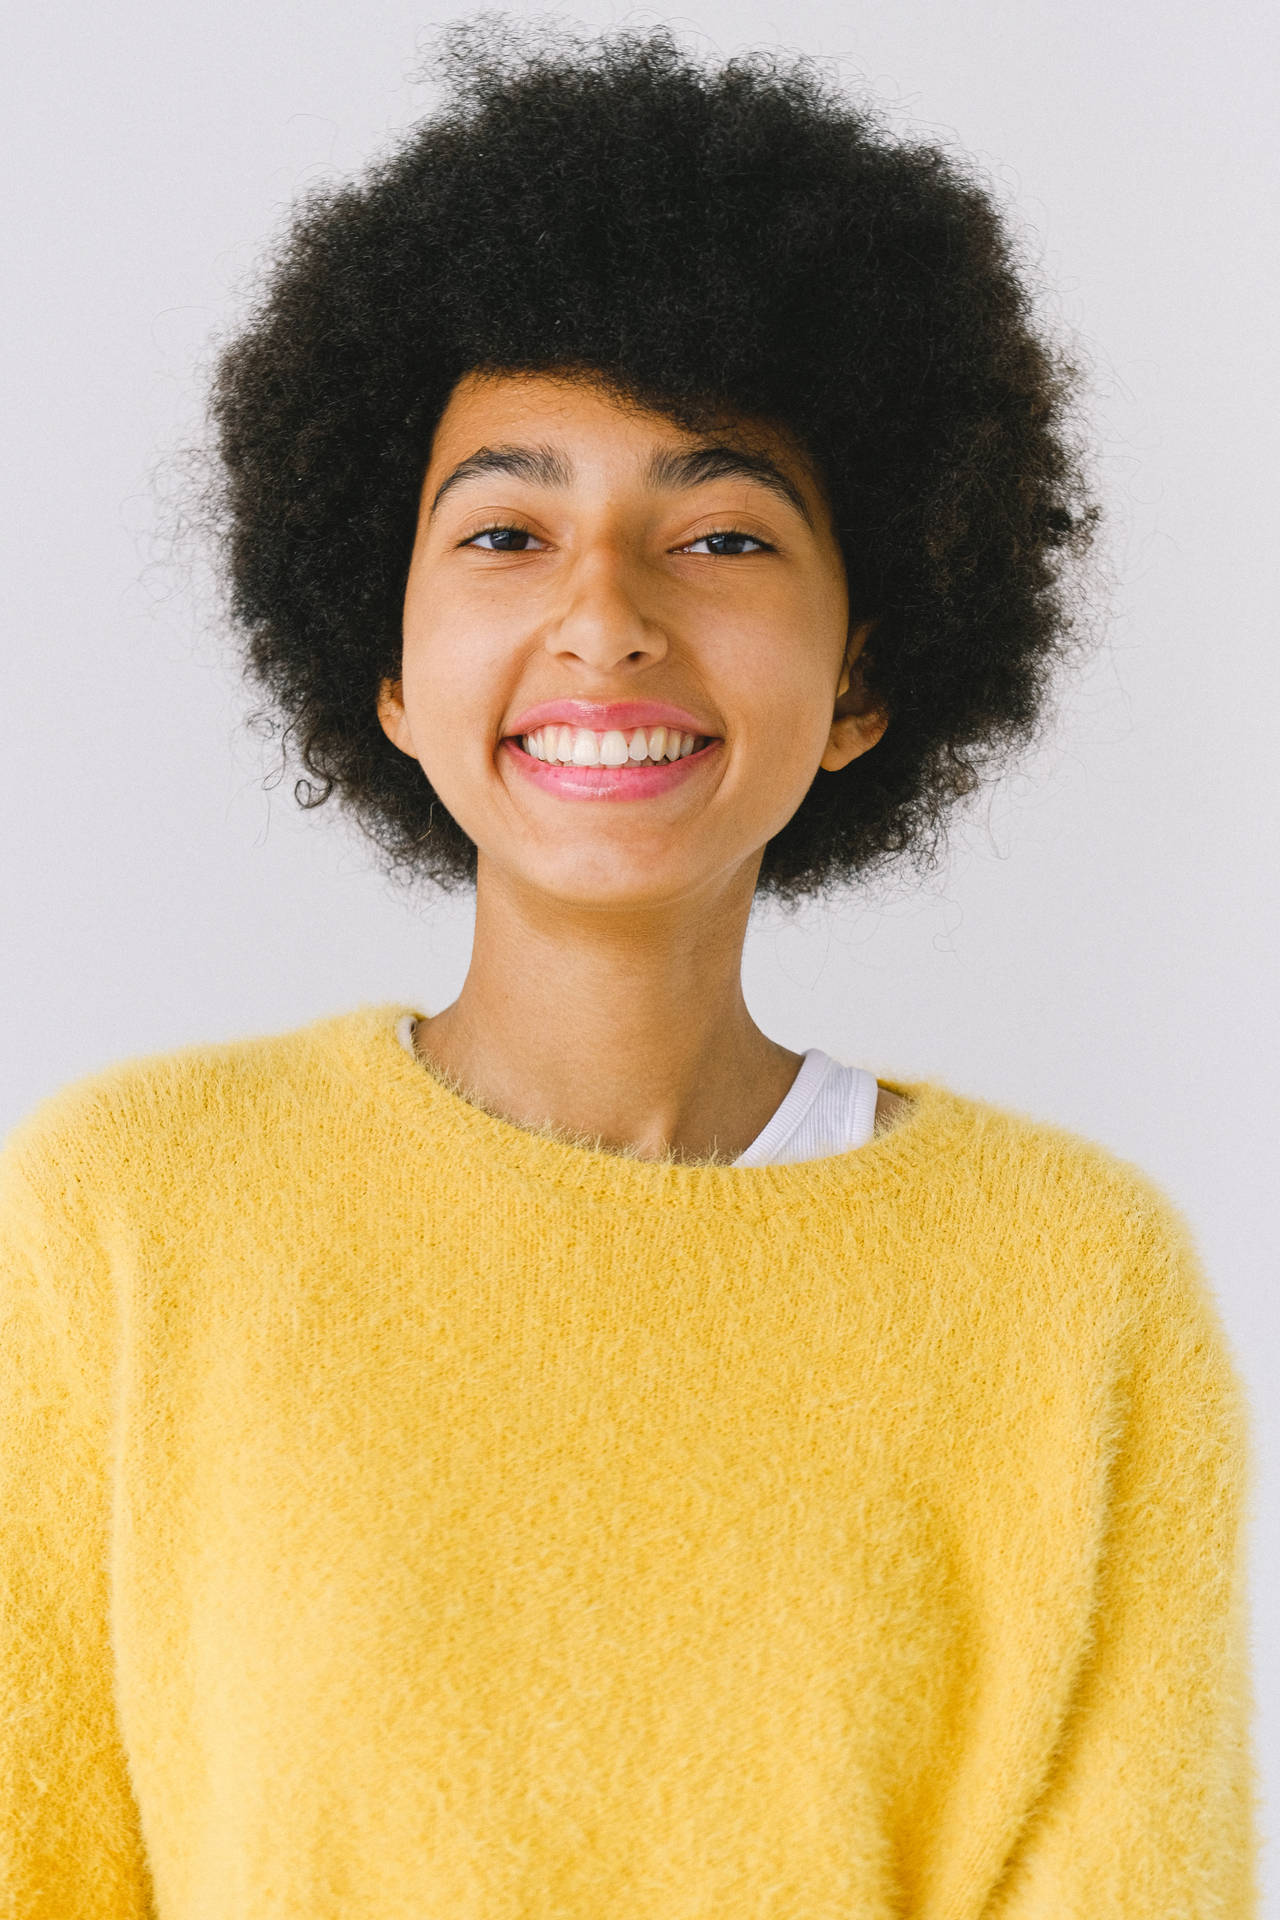 Headshot Of Black Woman In Yellow Knitted Top Wallpaper